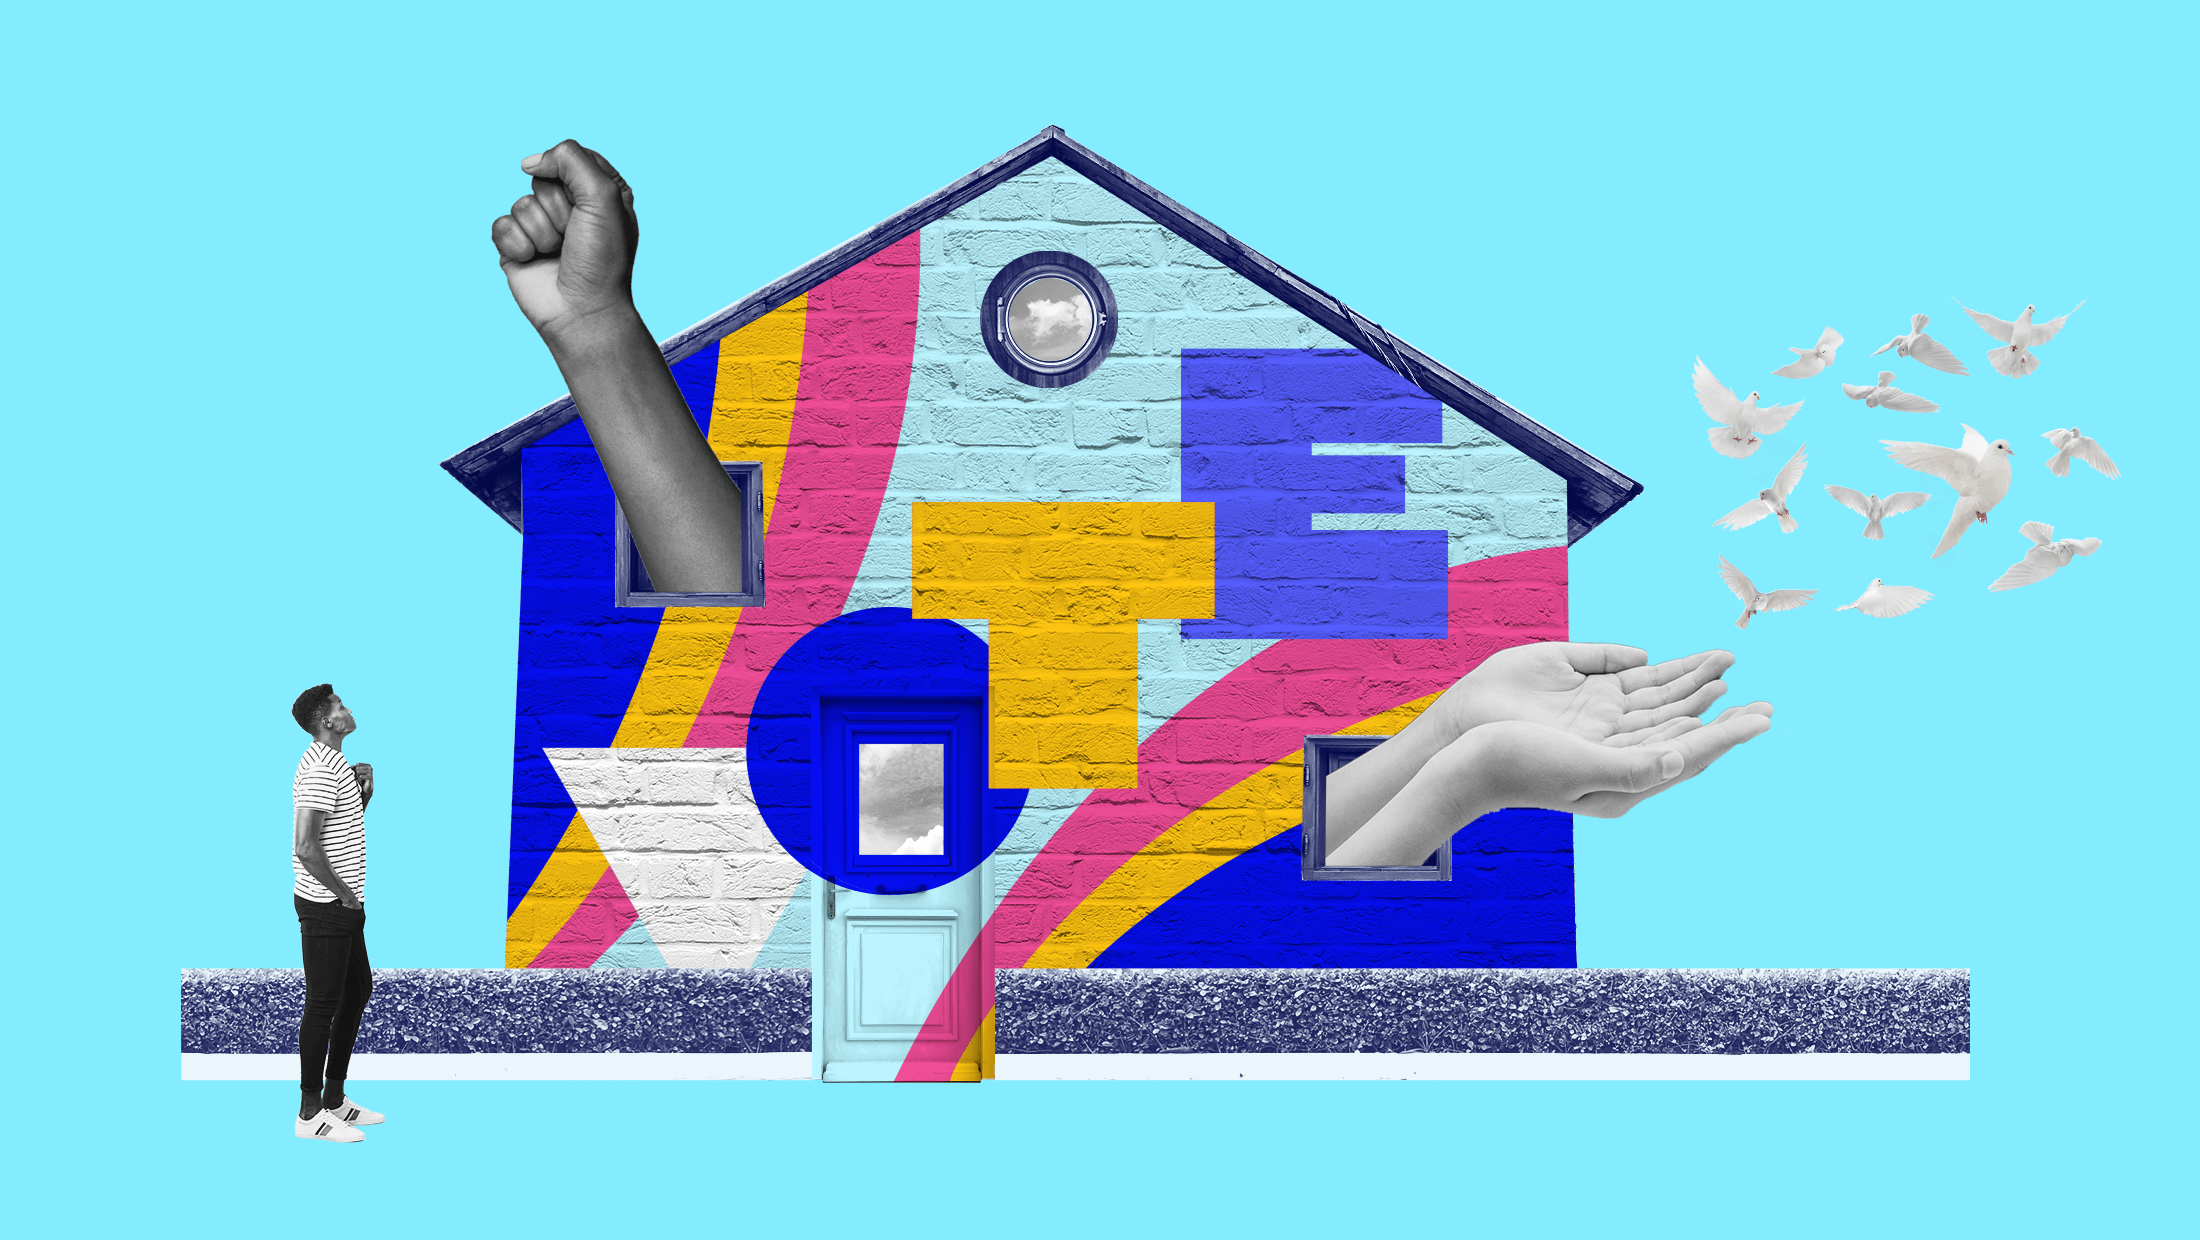 A man looking up toward a house that features a "VOTE" mural and two sets of hands coming through each of its windows, one is the fist of an activist and the other is a pair of hands releasing white doves into the open sky